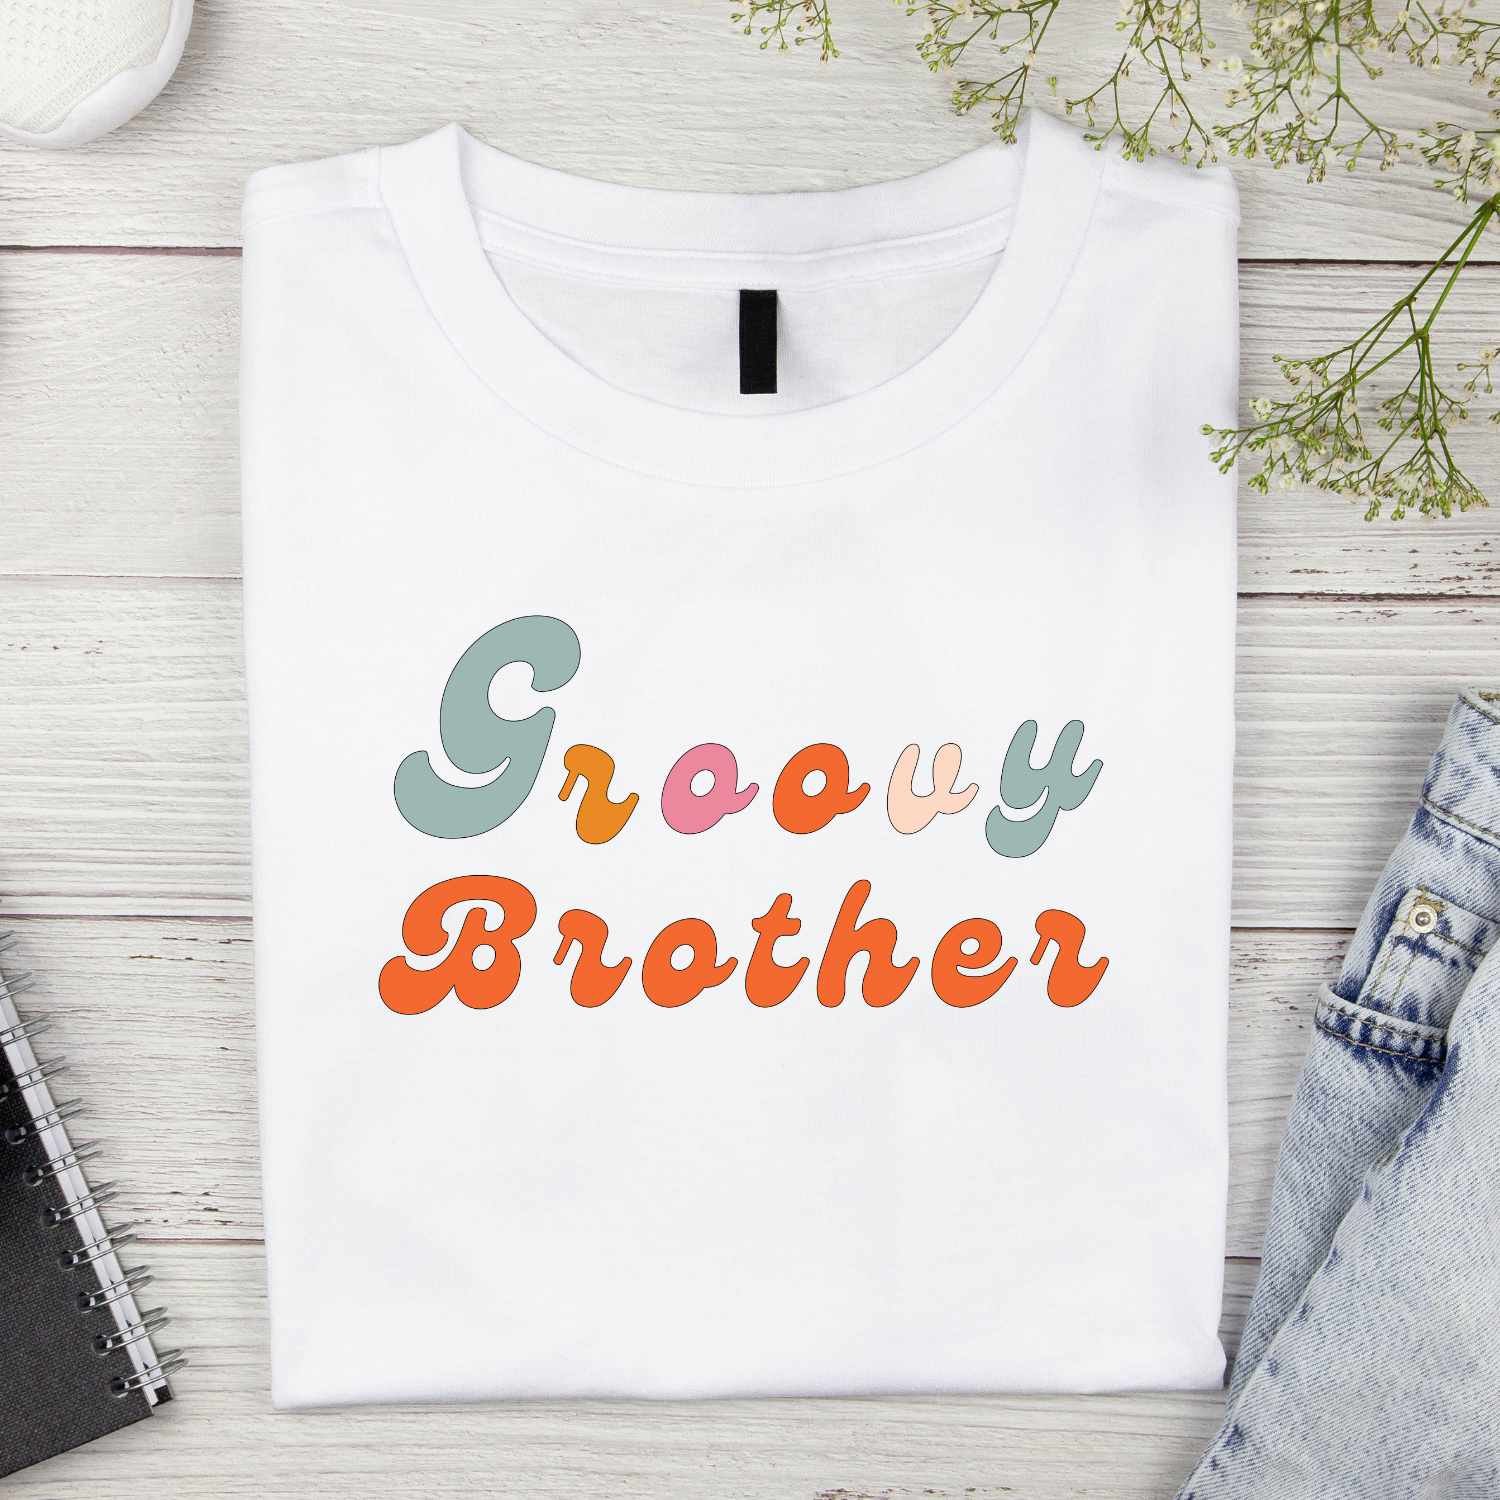 Groovy Brother T-shirt Design